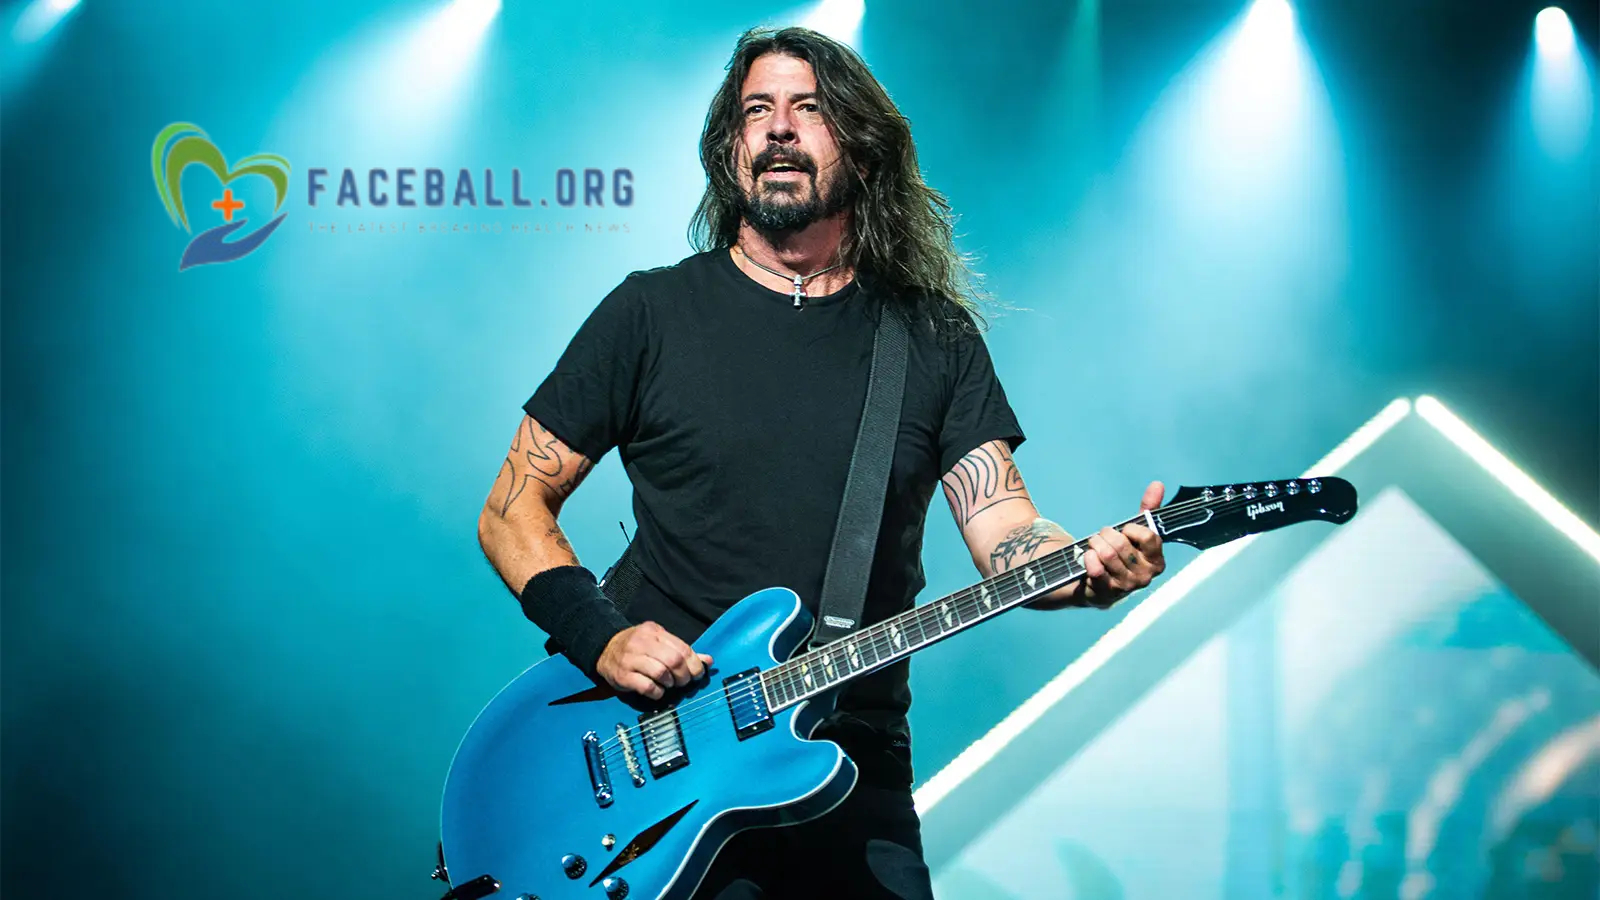 Dave Grohl Net Worth: In 2022, How Much Money will Dave Grohl have?